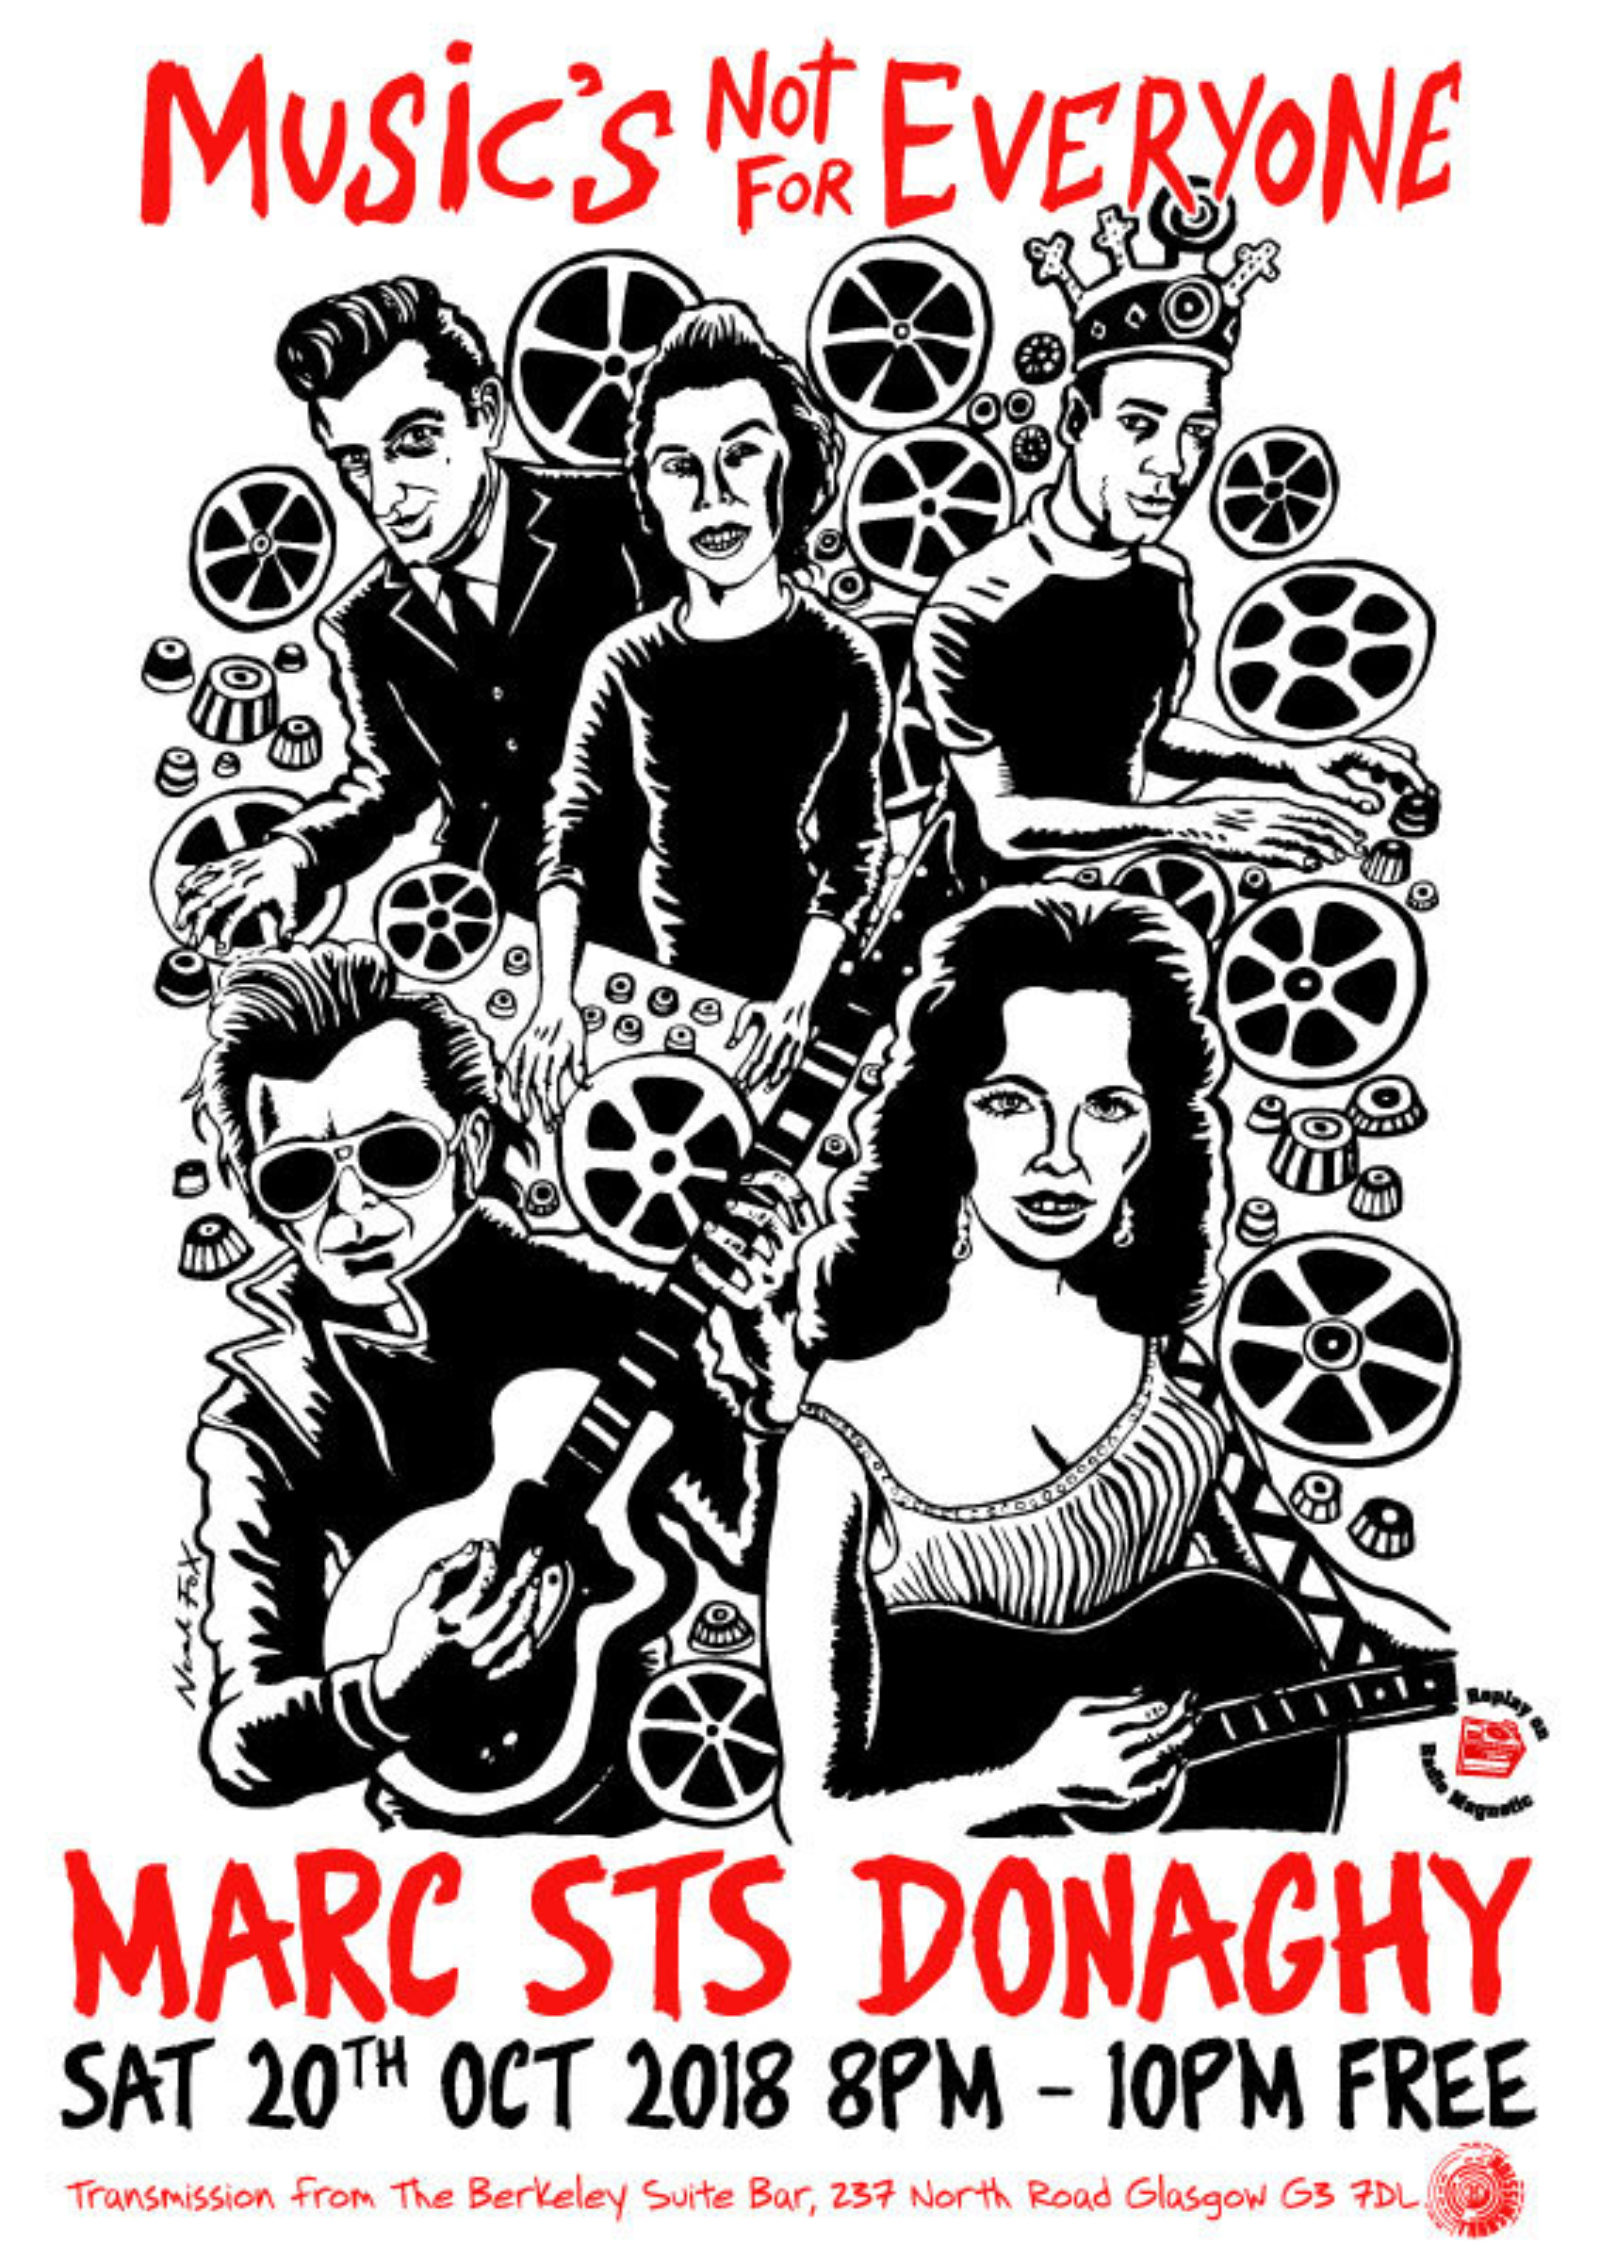 Music's Not For Everyone with Marc STS Donaghy